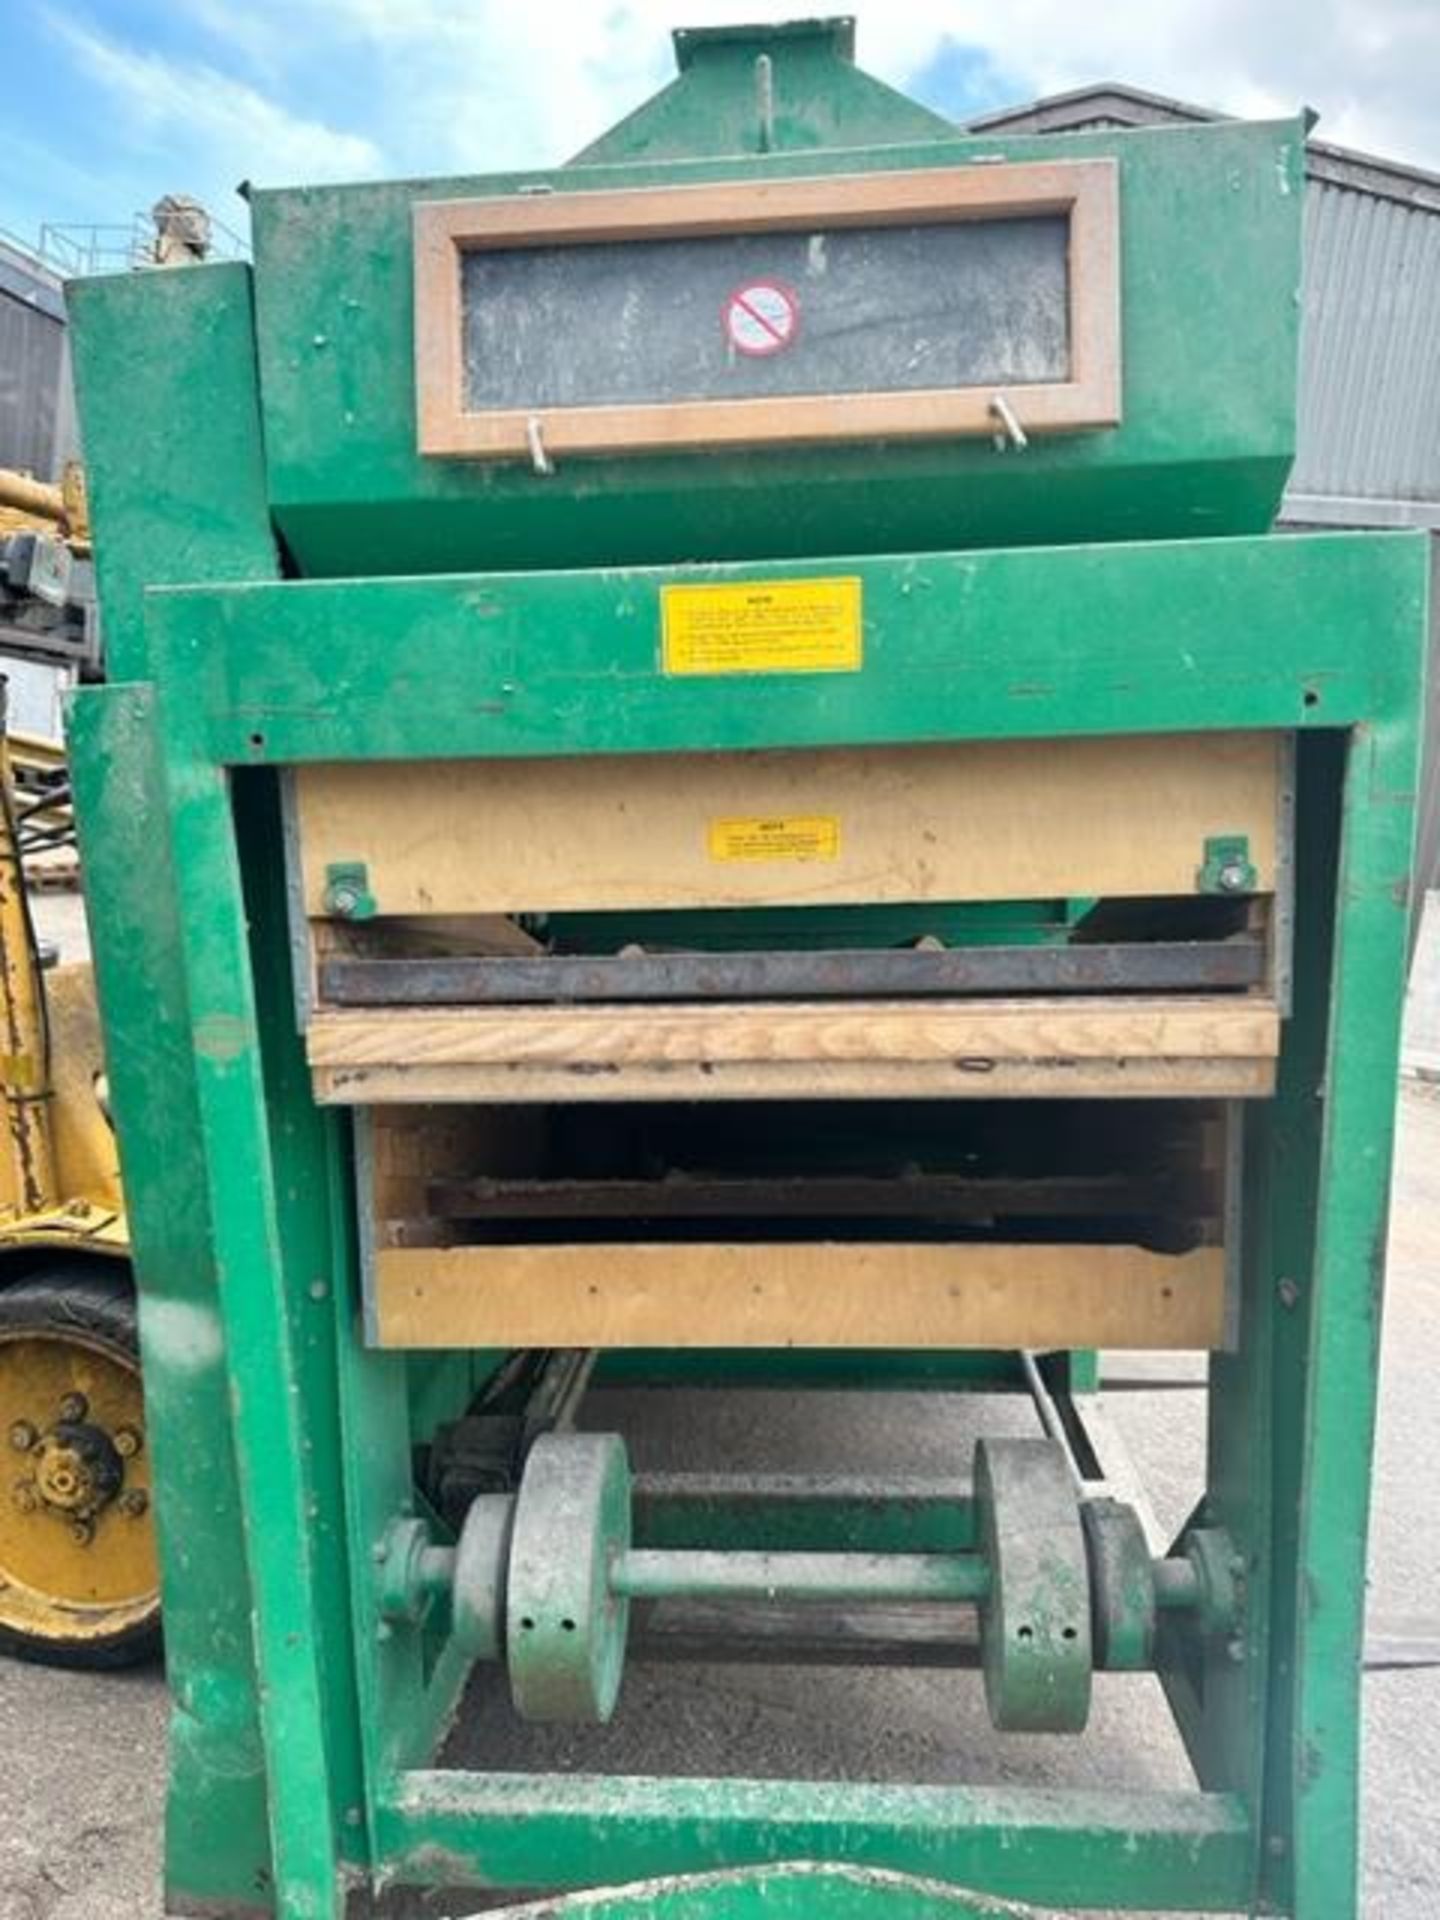 Westrup SAB-1000 Pre Cleaner Machine (no aspiration fan). Loading free of charge - yes. Lot location - Image 6 of 15